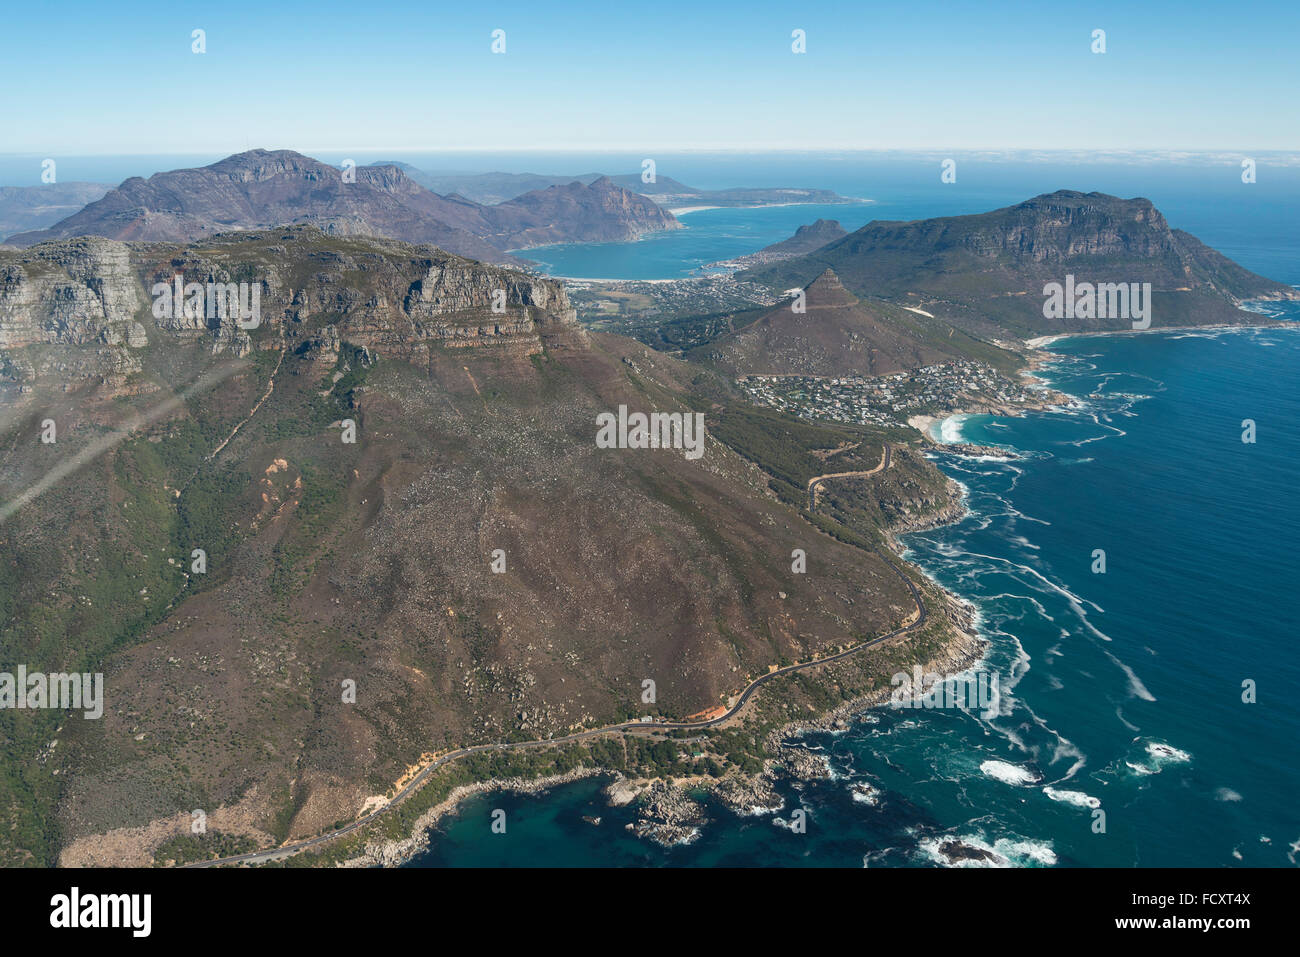 Aerial view of Cape Peninsula, City of Cape Town Metropolitan Municipality, Western Cape Province, Republic of South Africa Stock Photo